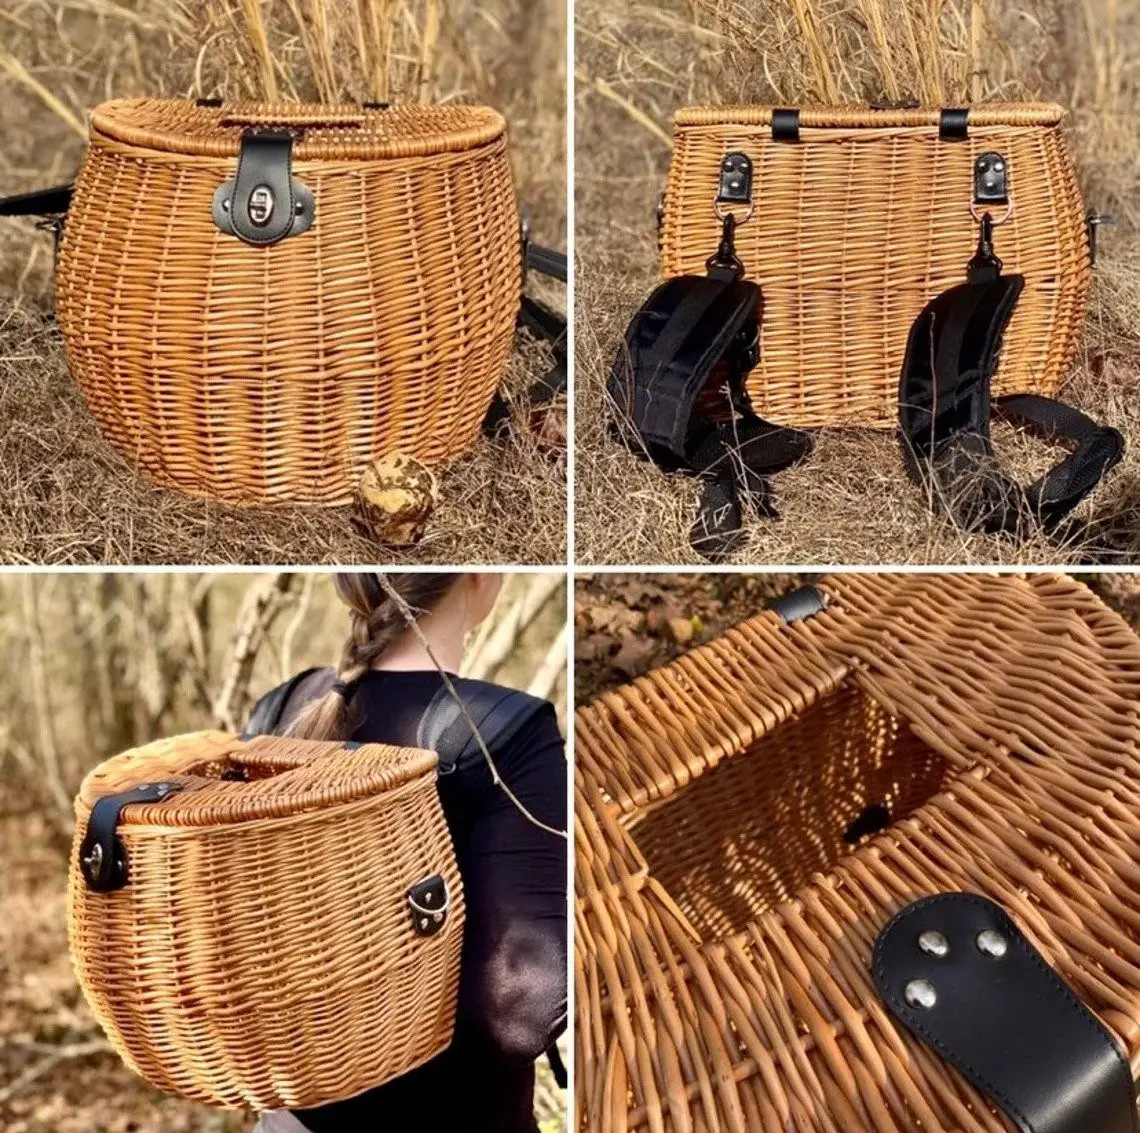 A large foraging wicker basket backpack that's the perfect gift for foragers